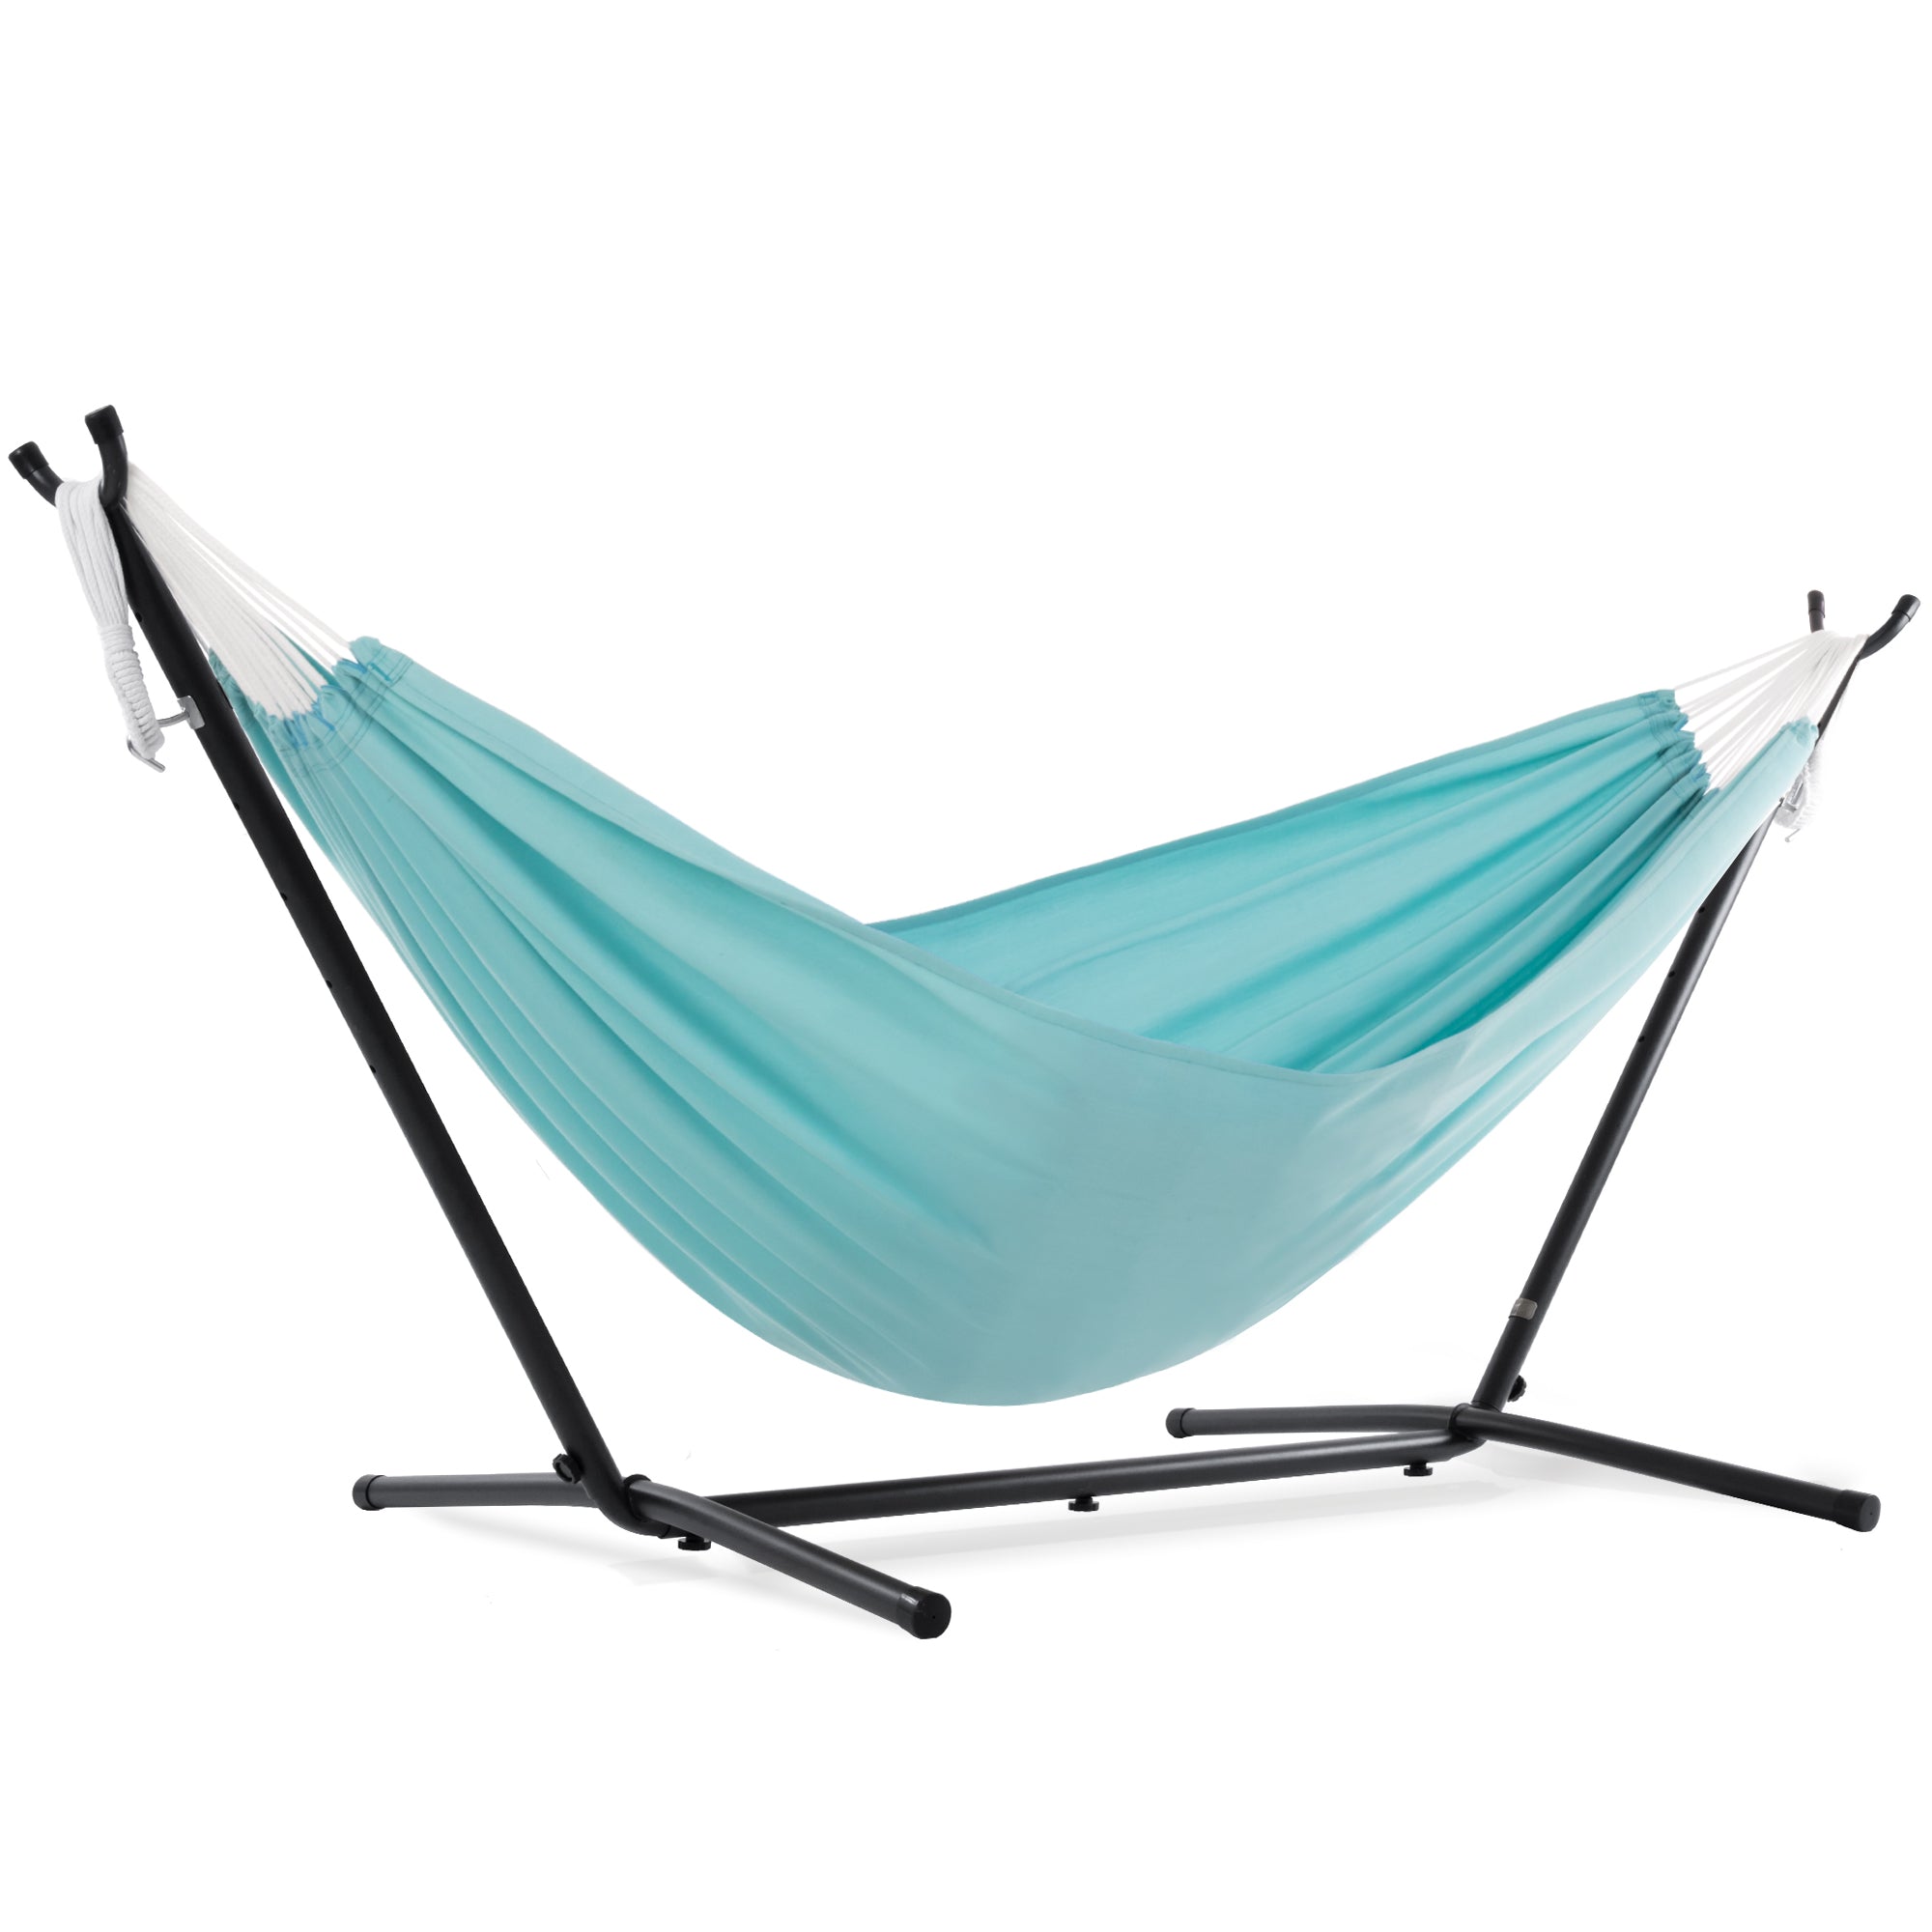 Double Polyester Hammock with Stand Aqua